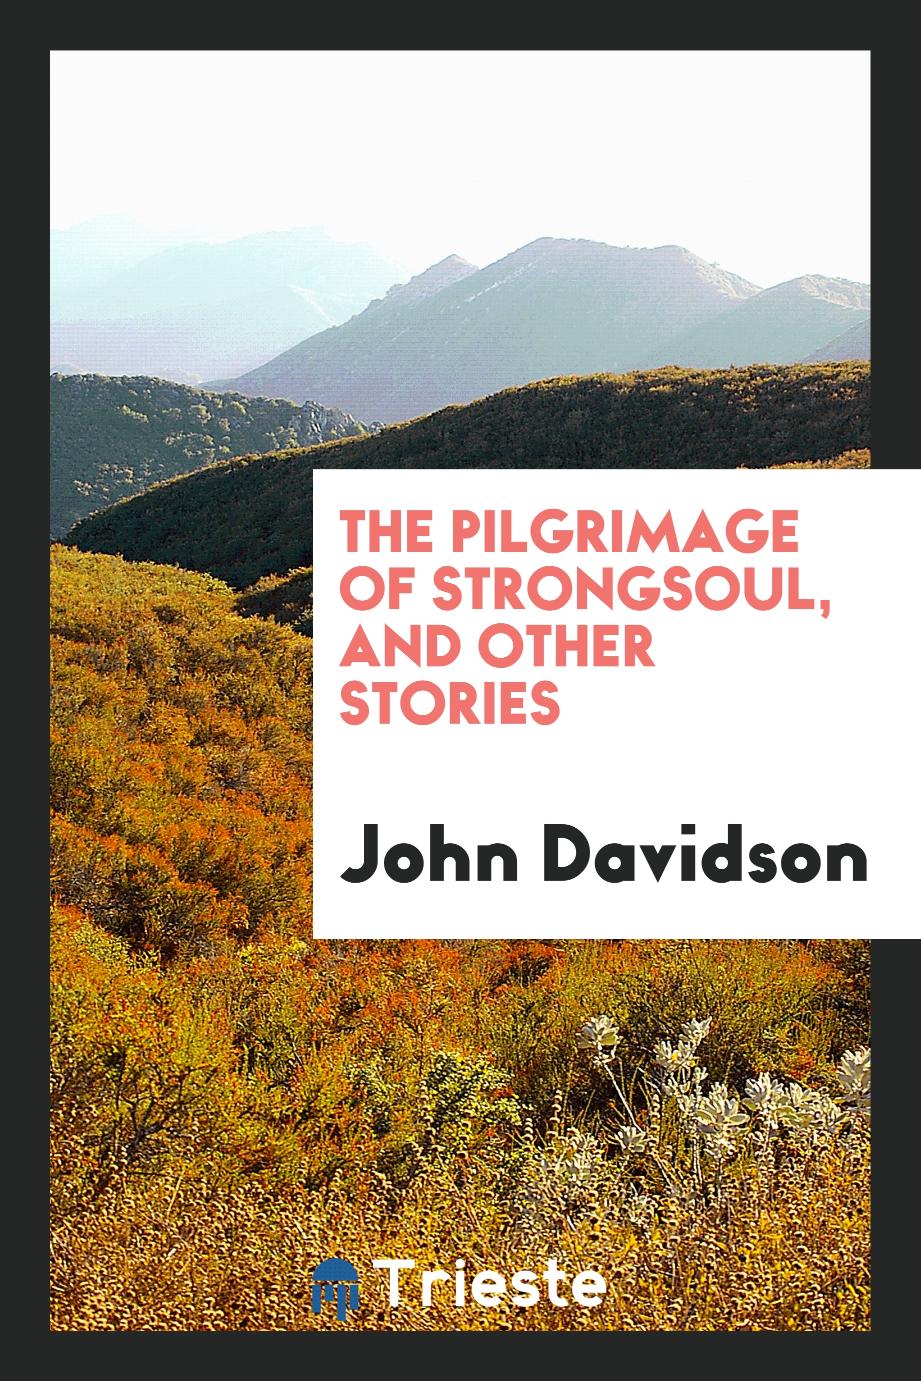 The pilgrimage of Strongsoul, and other stories